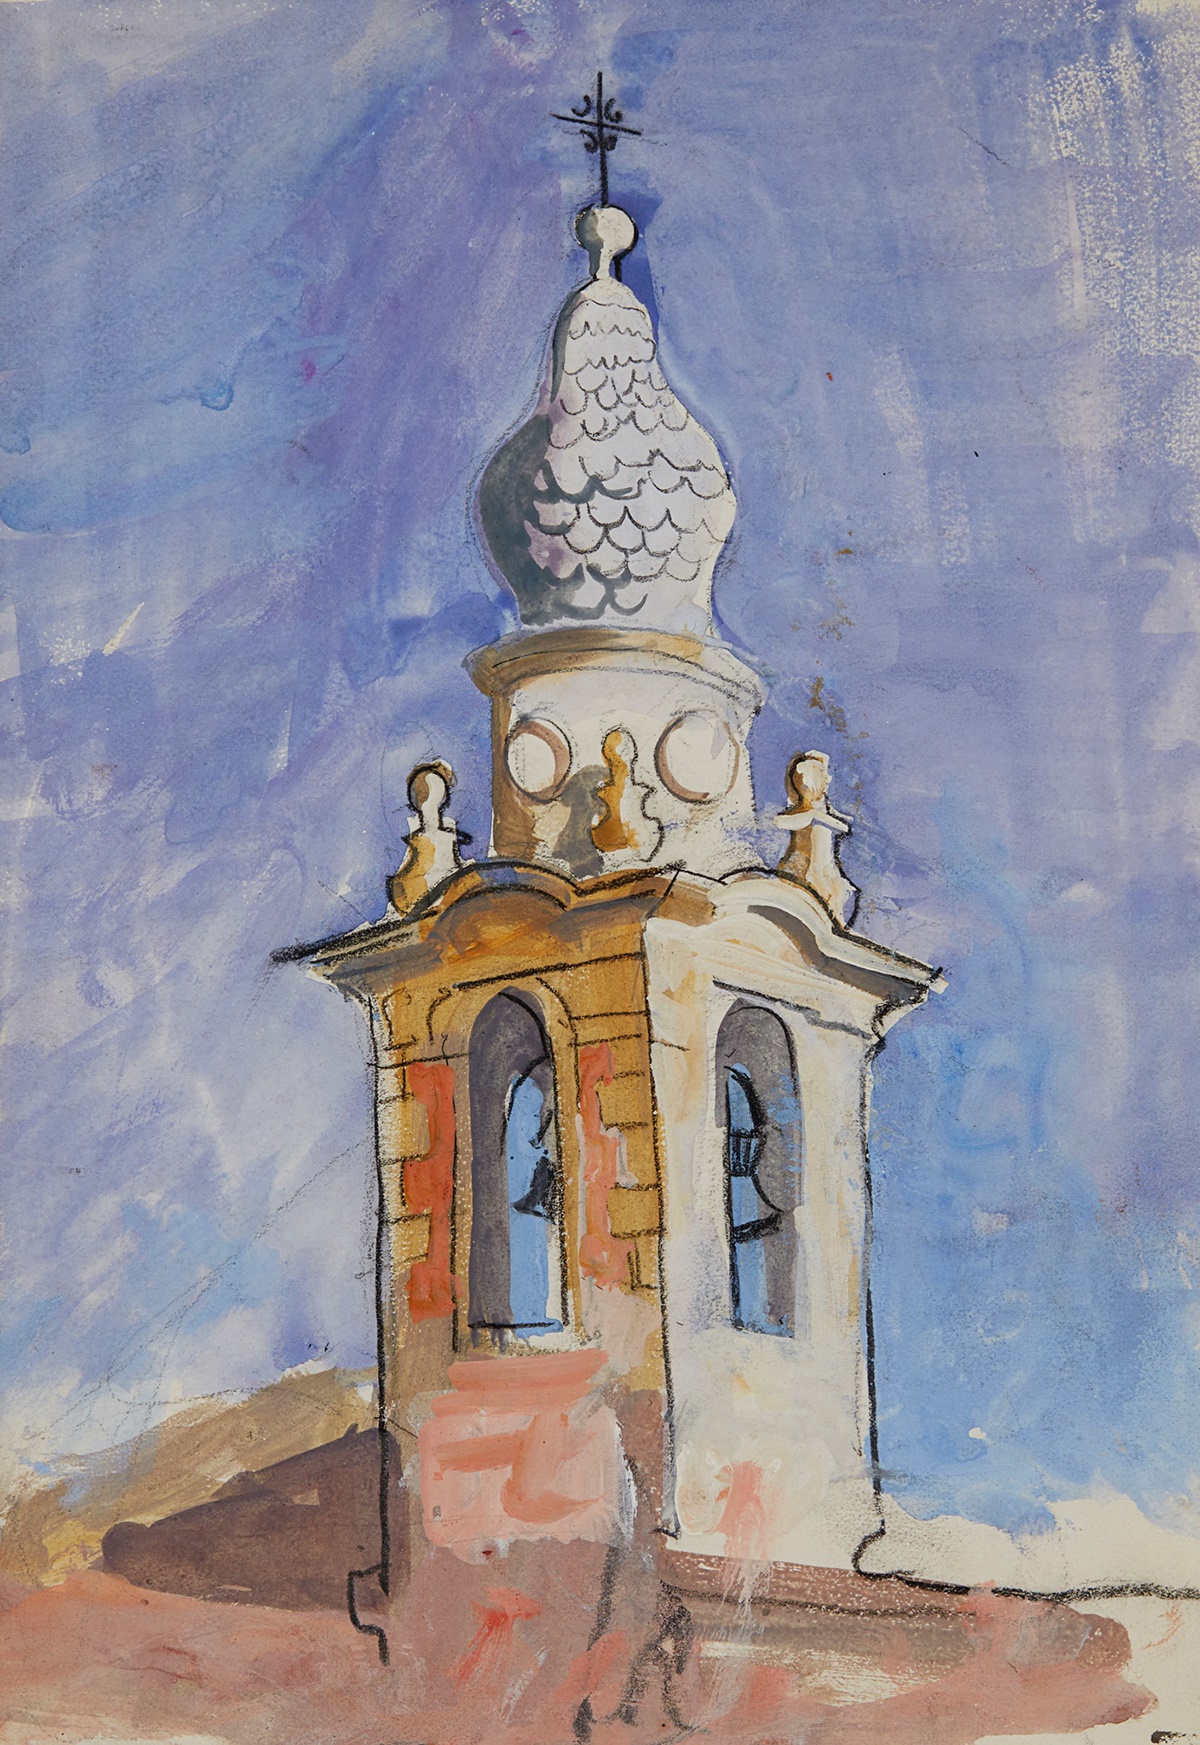 LOT 152 | ANNE REDPATH O.B.E., R.S.A., A.R.A., L.L.D., A.R.W.S., R.O.I., R.B.A. (SCOTTISH 1895-1965) | BELL TOWER, PORTUGAL  Charcoal and watercolour | 38cm x 27cm (15in x 10.5in) | £800 - £1,200 + fees